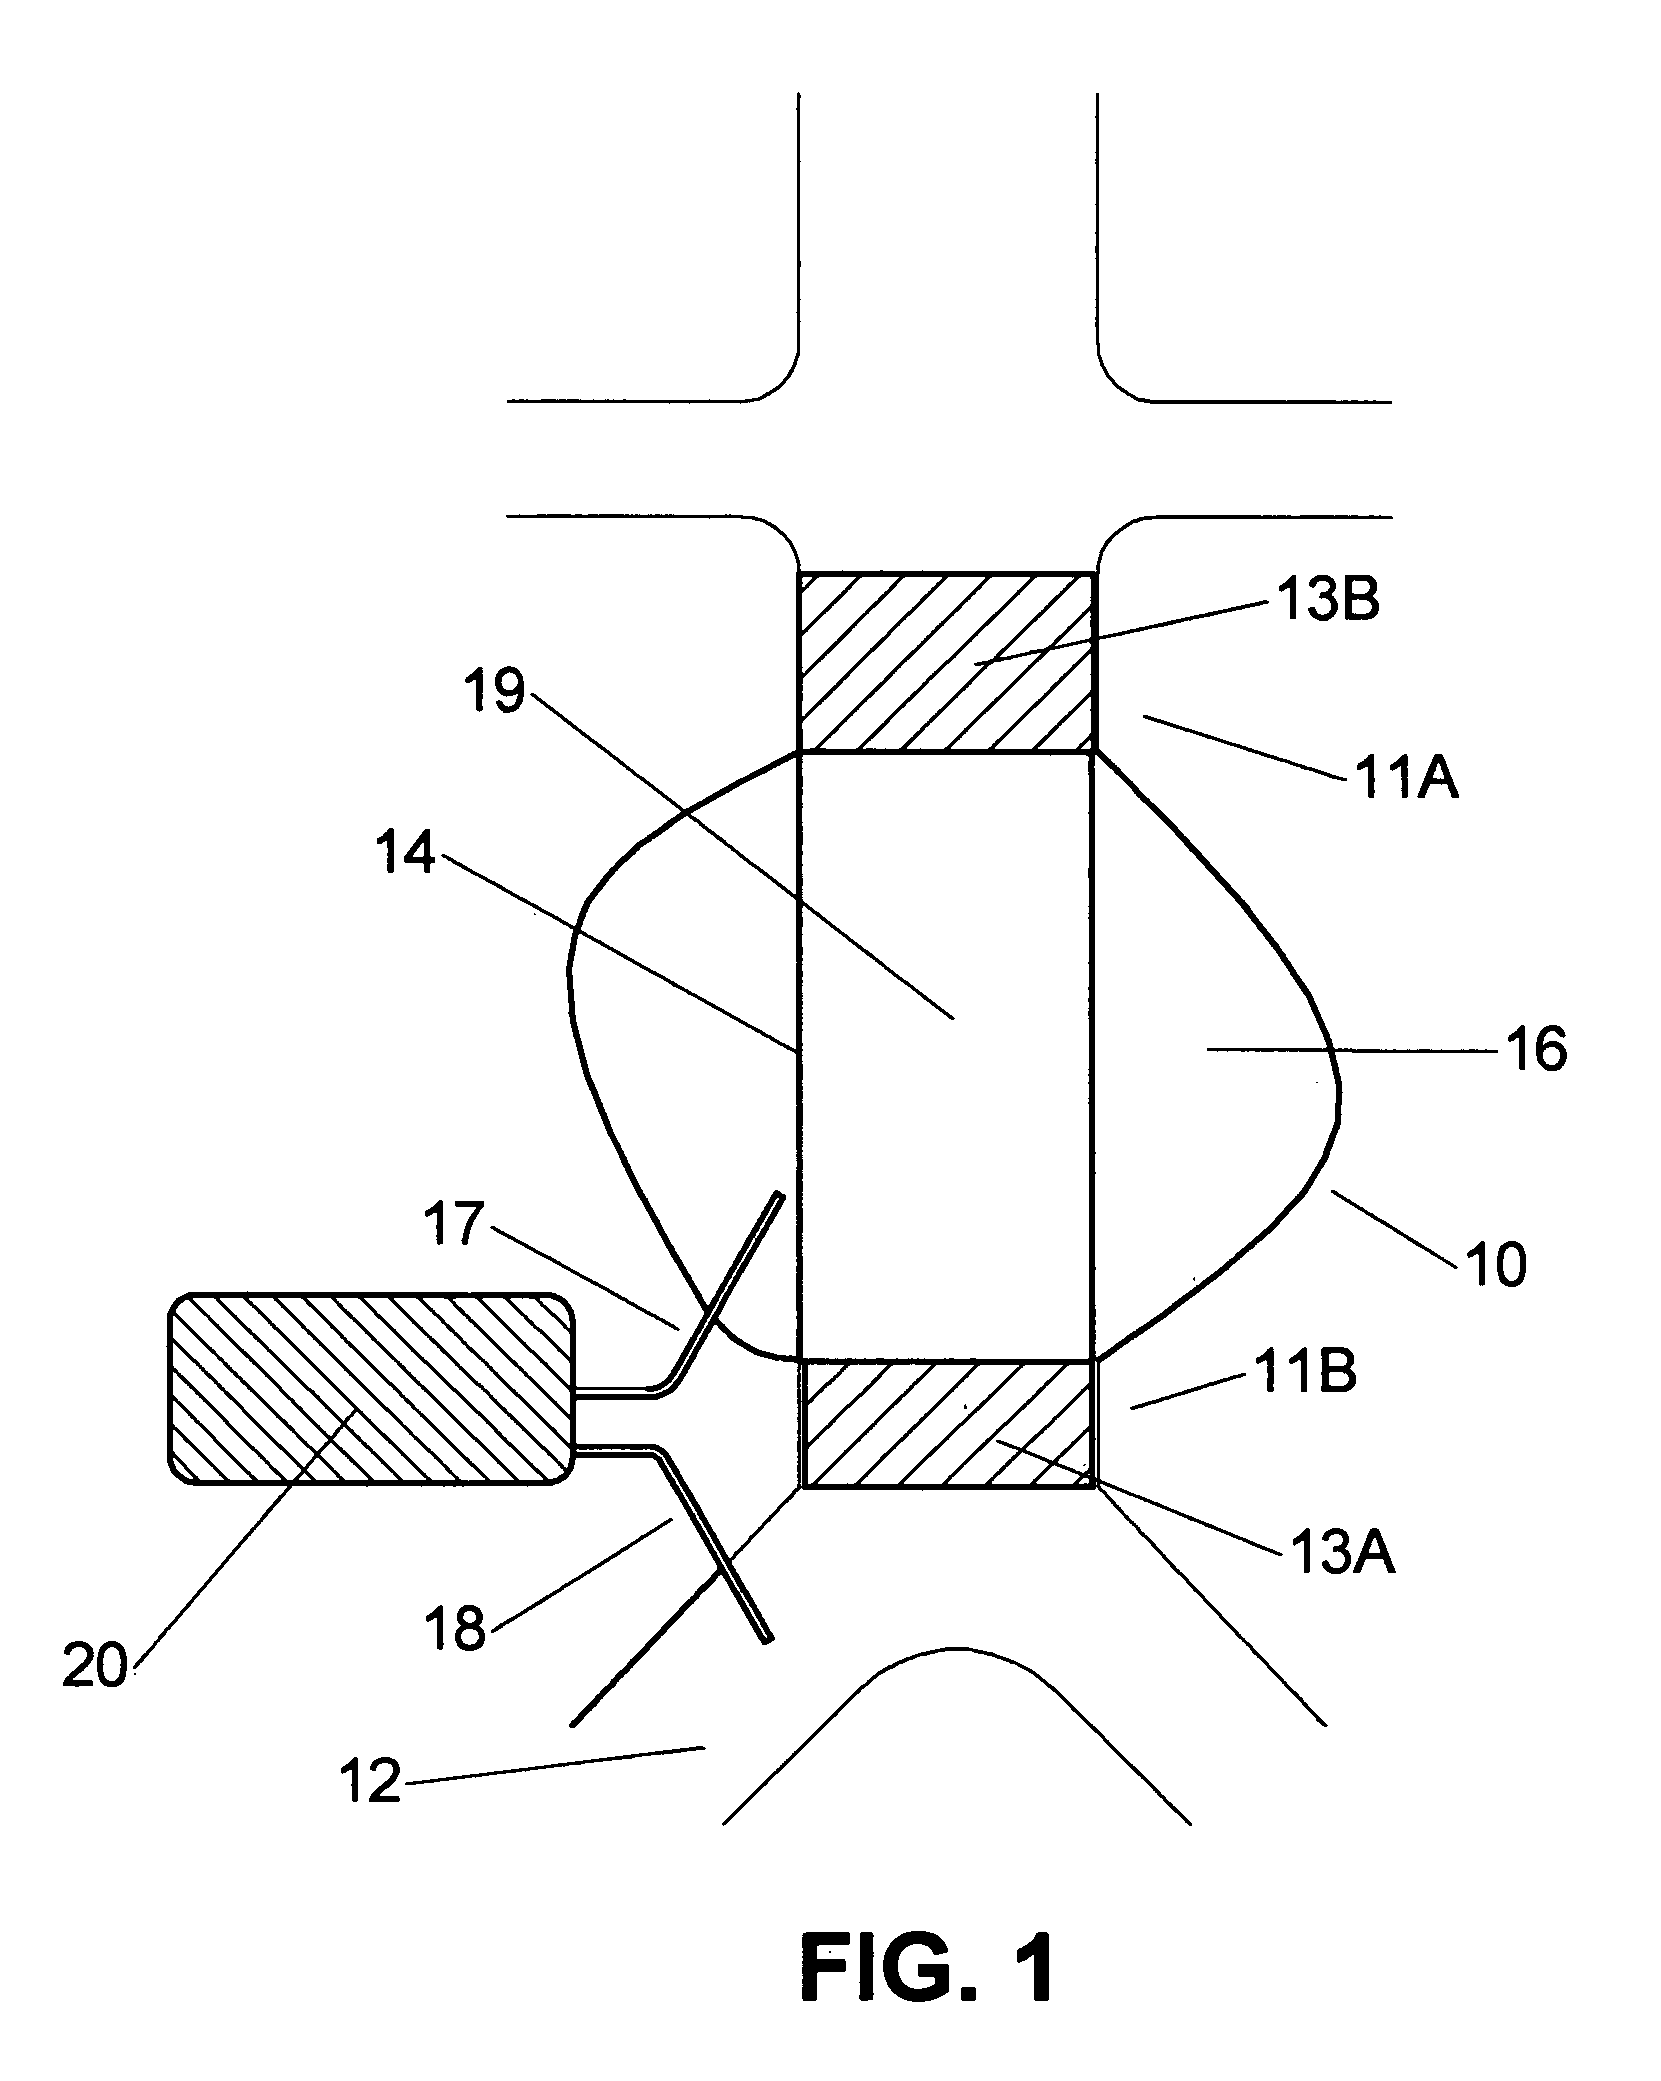 Implantable device for monitoring aneurysm sac parameters